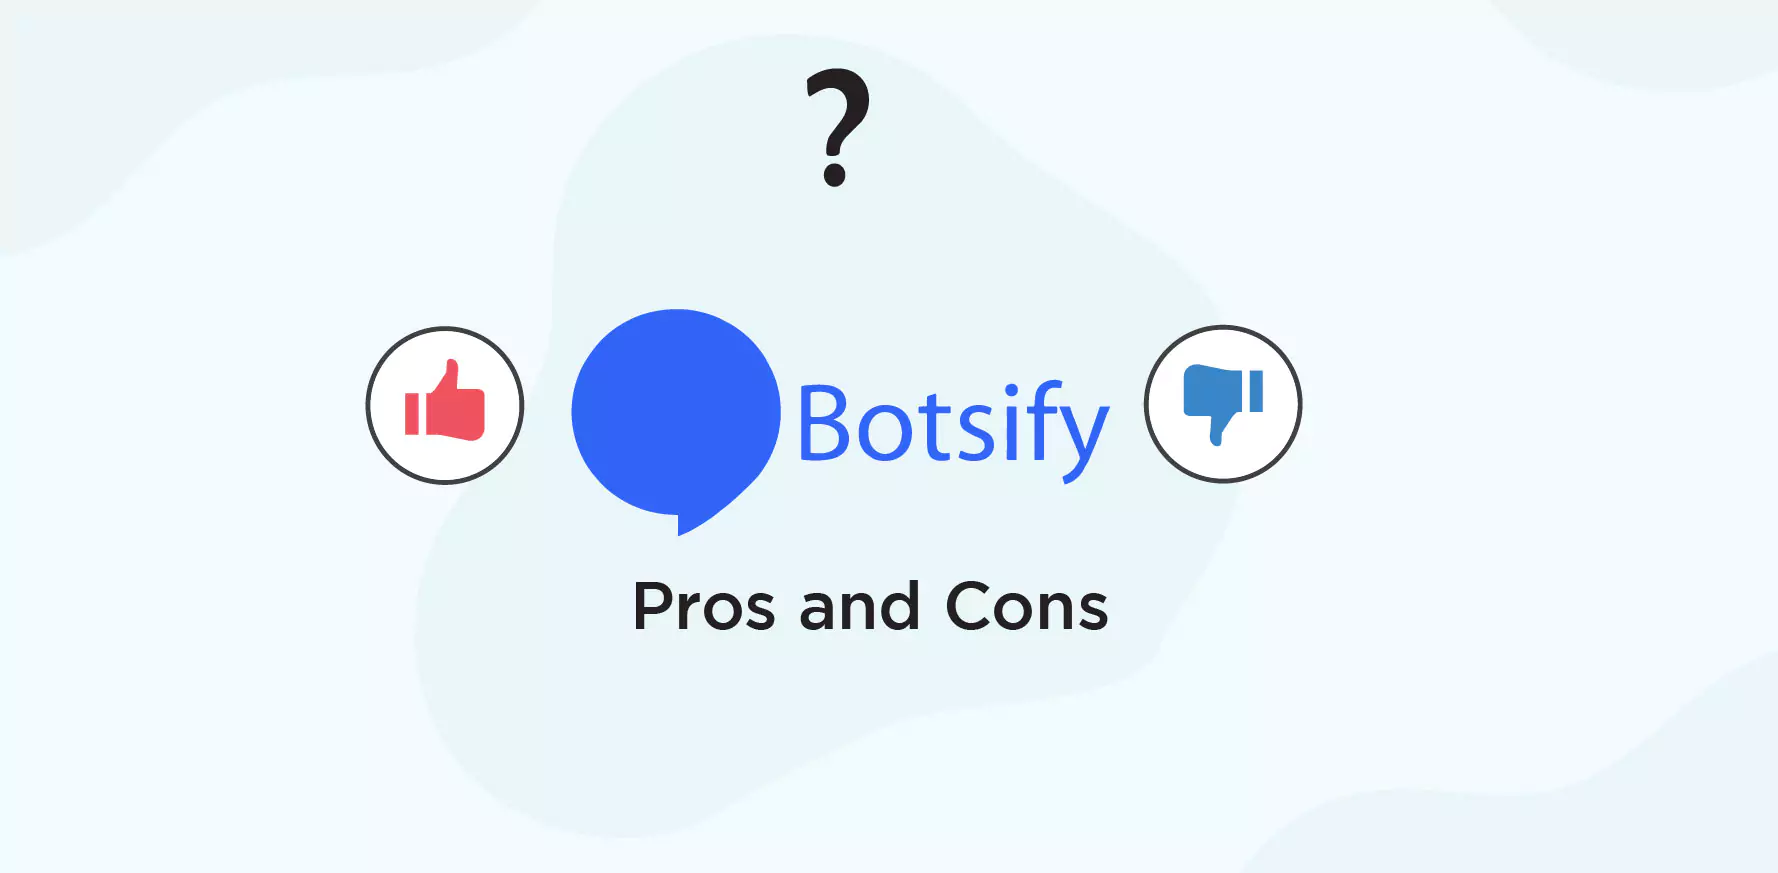 Botsify Pros and Cons